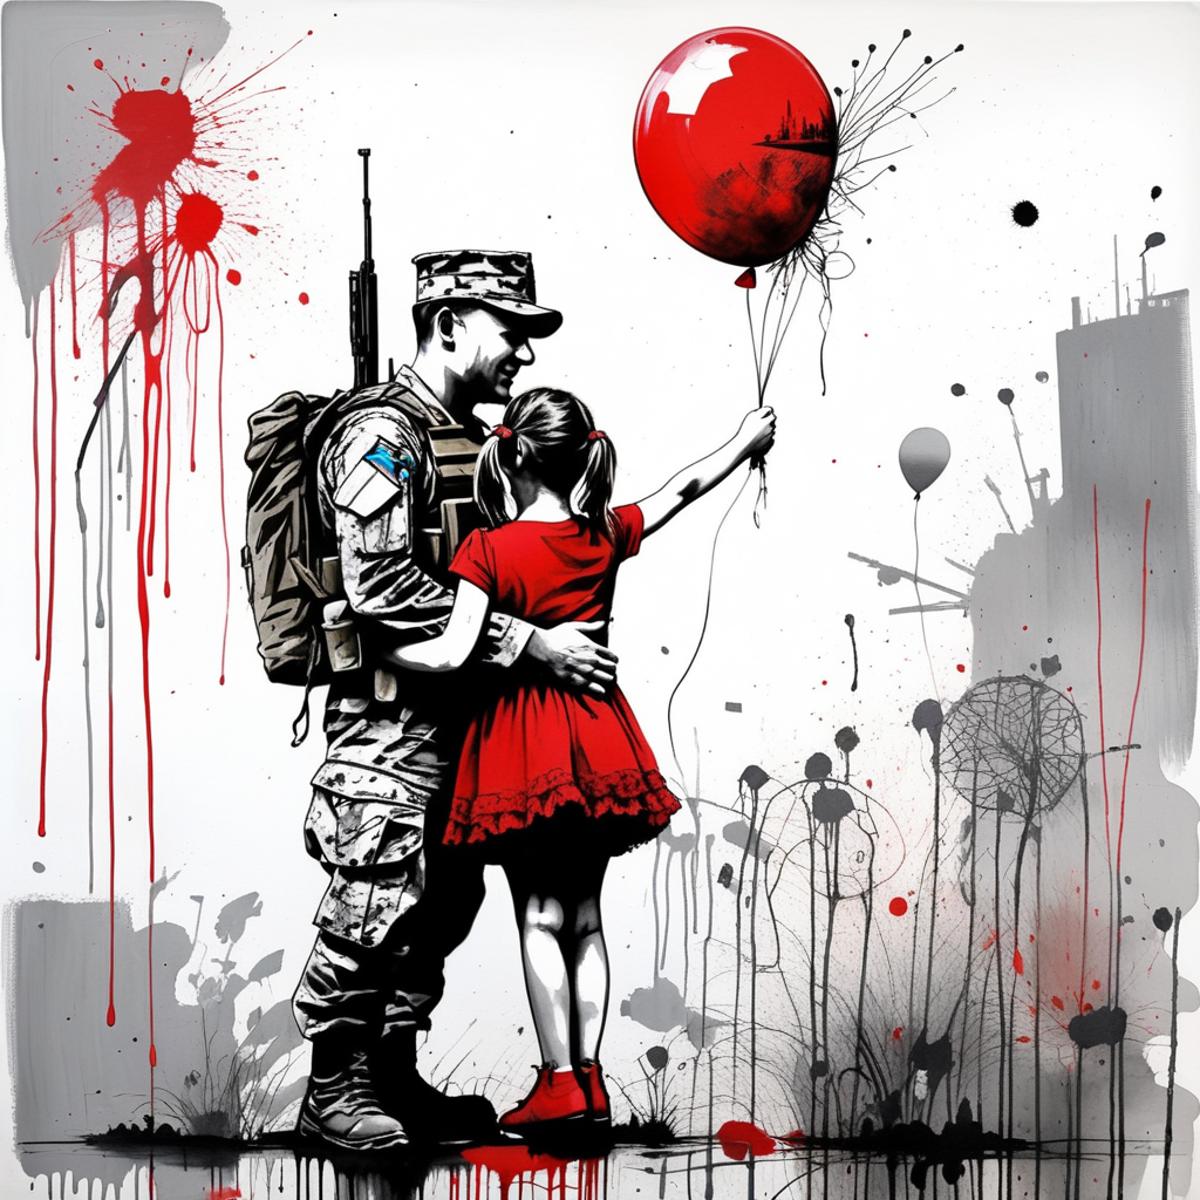 A soldier and a little girl are holding a red balloon in a painting.